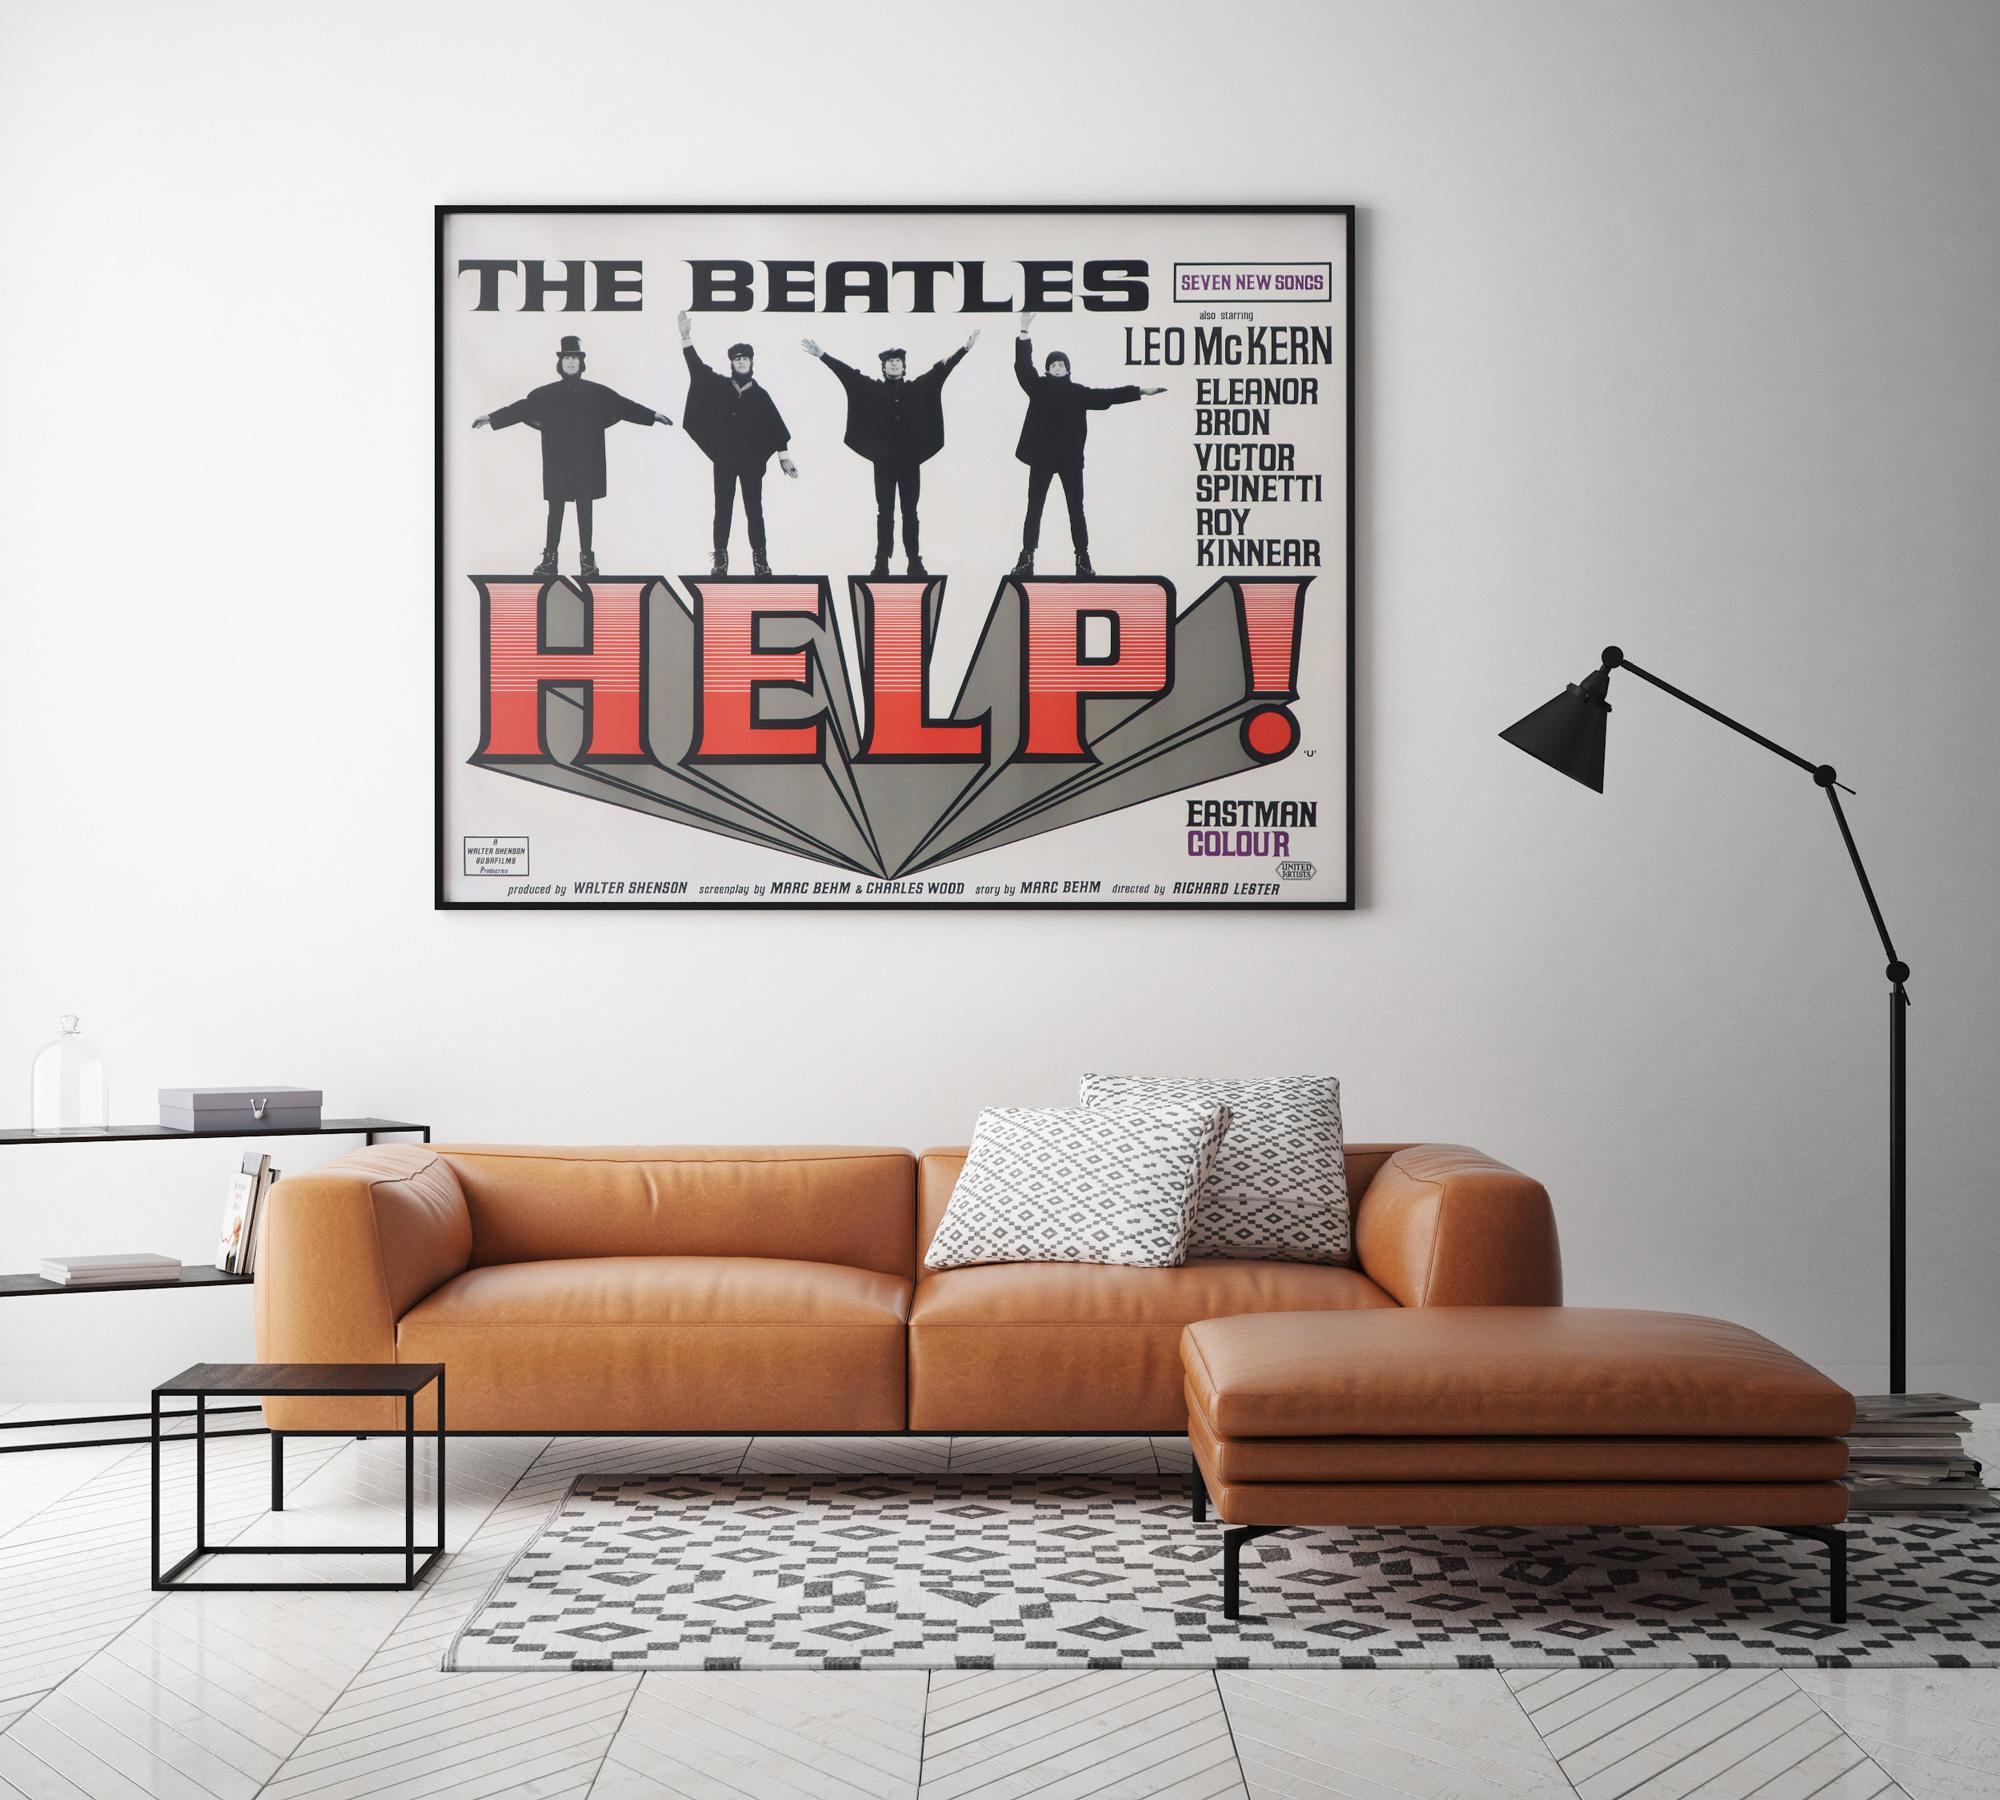 Rare country-of-original and original-year-of-release British film poster for the Beatles second movie Help!
Featuring the iconic semaphore photography by Robert Freeman. 

Professionally cleaned, de-acidified and linen-backed. Poster size 30 x